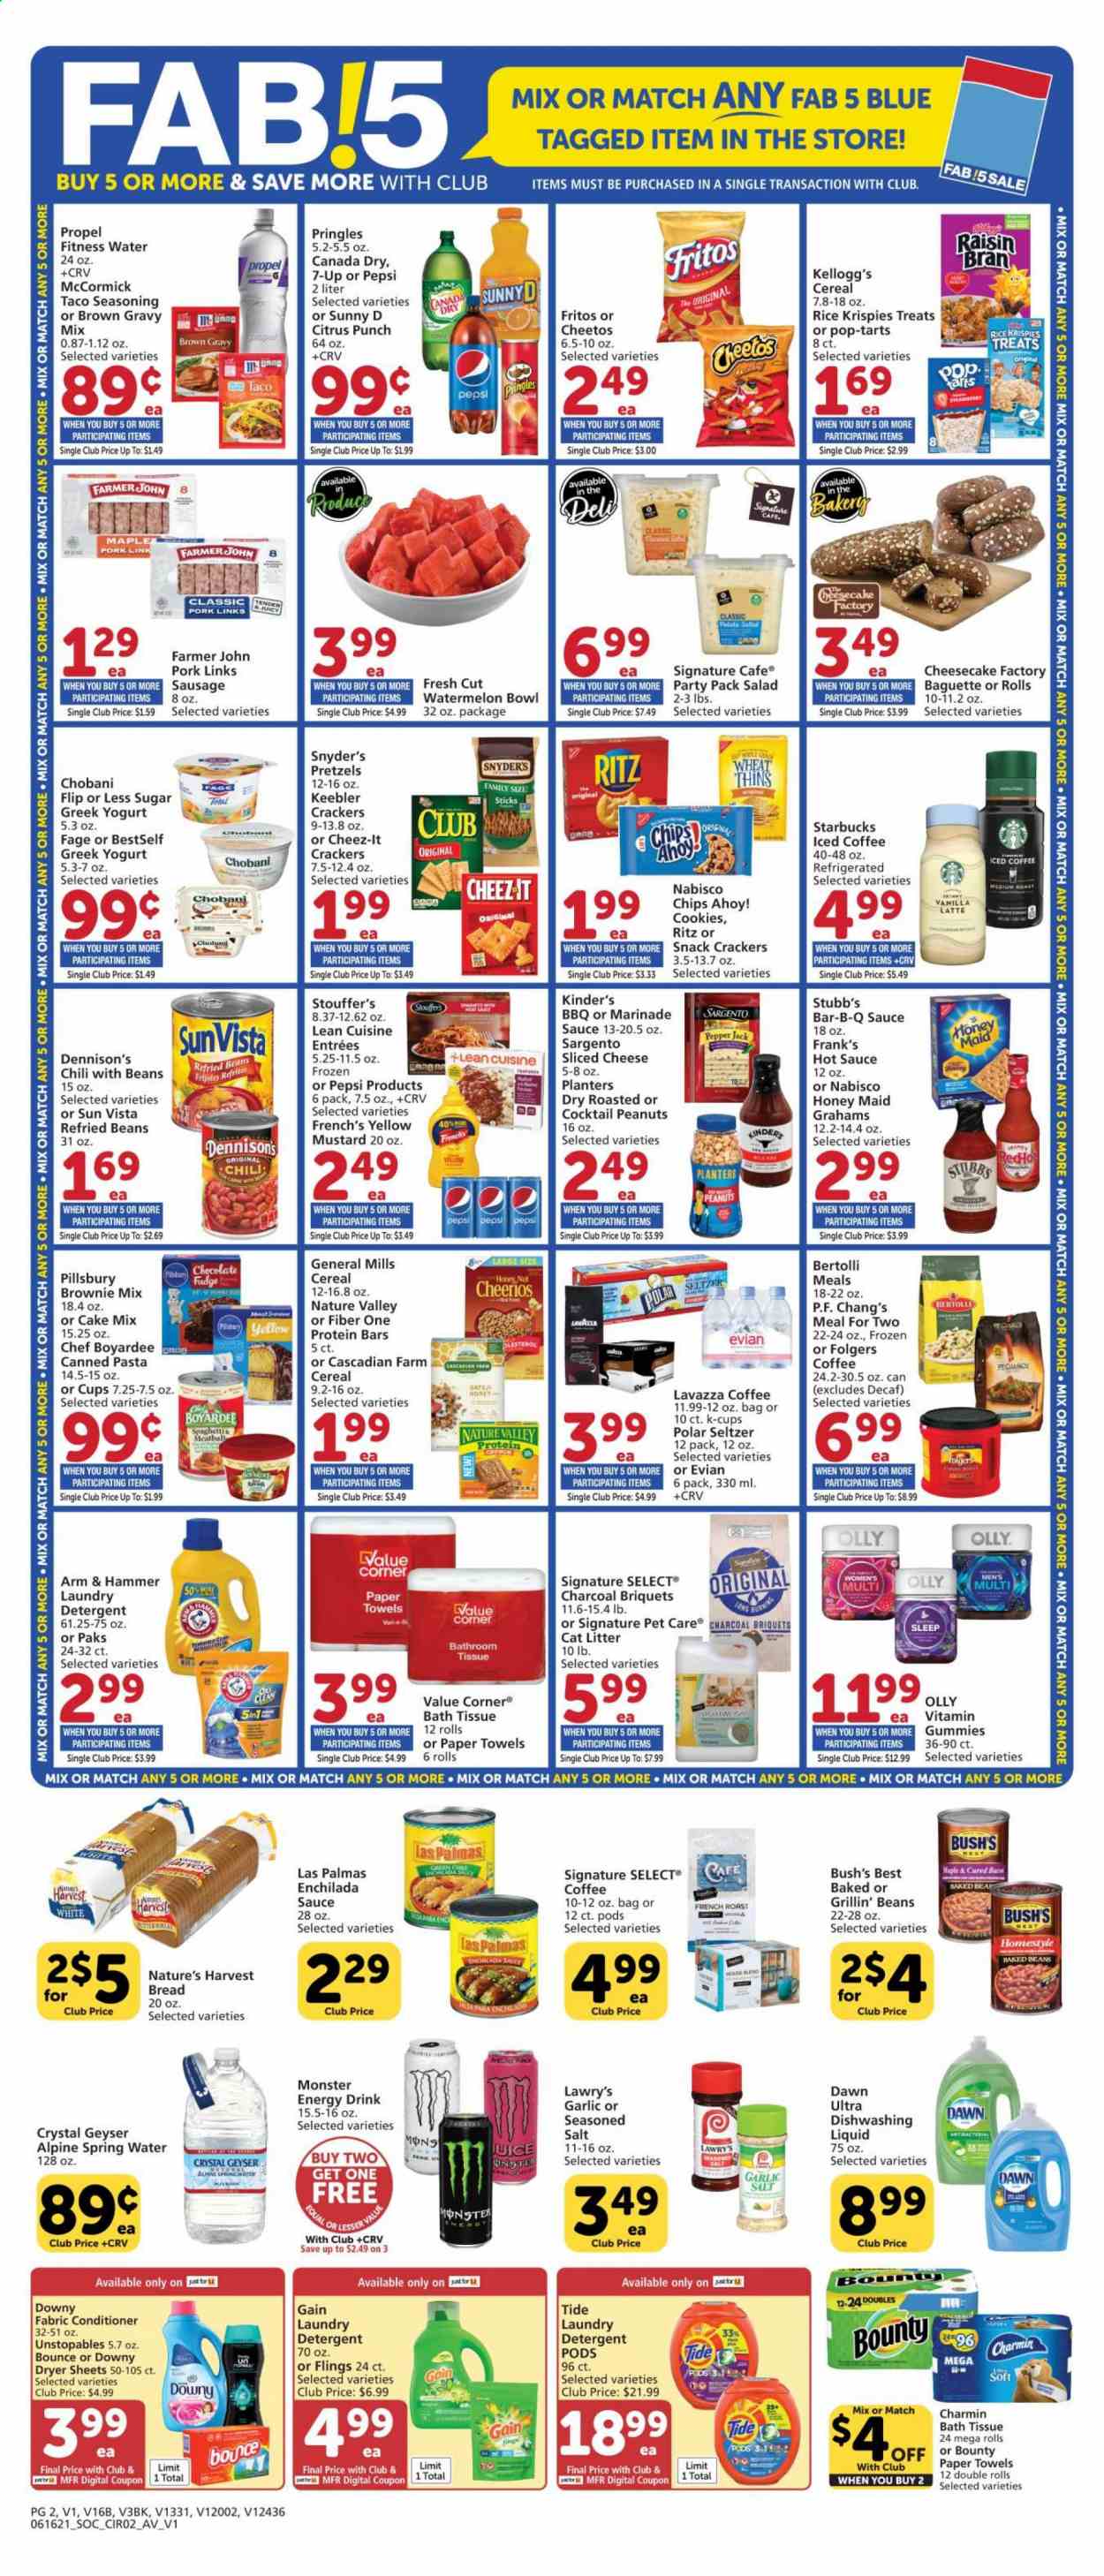 thumbnail - Albertsons Flyer - 06/16/2021 - 06/22/2021 - Sales products - baguette, bread, pretzels, cheesecake, brownie mix, cake mix, garlic, salad, watermelon, pasta, sauce, Pillsbury, Lean Cuisine, Bertolli, sausage, sliced cheese, Pepper Jack cheese, cheese, Sargento, greek yoghurt, yoghurt, Chobani, Stouffer's, cookies, fudge, snack, Bounty, crackers, Kellogg's, Pop-Tarts, Chips Ahoy!, Keebler, RITZ, Fritos, Pringles, Cheetos, Thins, Cheez-It, ARM & HAMMER, enchilada sauce, refried beans, baked beans, Chef Boyardee, cereals, Cheerios, protein bar, Rice Krispies, Raisin Bran, Honey Maid, Nature Valley, Fiber One, gravy mix, spice, mustard, hot sauce, marinade, peanuts, Planters, Canada Dry, Pepsi, juice, energy drink, Monster, 7UP, fruit punch, seltzer water, spring water, Evian, iced coffee, Starbucks, Folgers, coffee capsules, K-Cups, Lavazza, sake, bath tissue, kitchen towels, paper towels, Charmin, detergent, Gain, Tide, Unstopables, laundry detergent, dryer sheets, Downy Laundry, cat litter. Page 2.